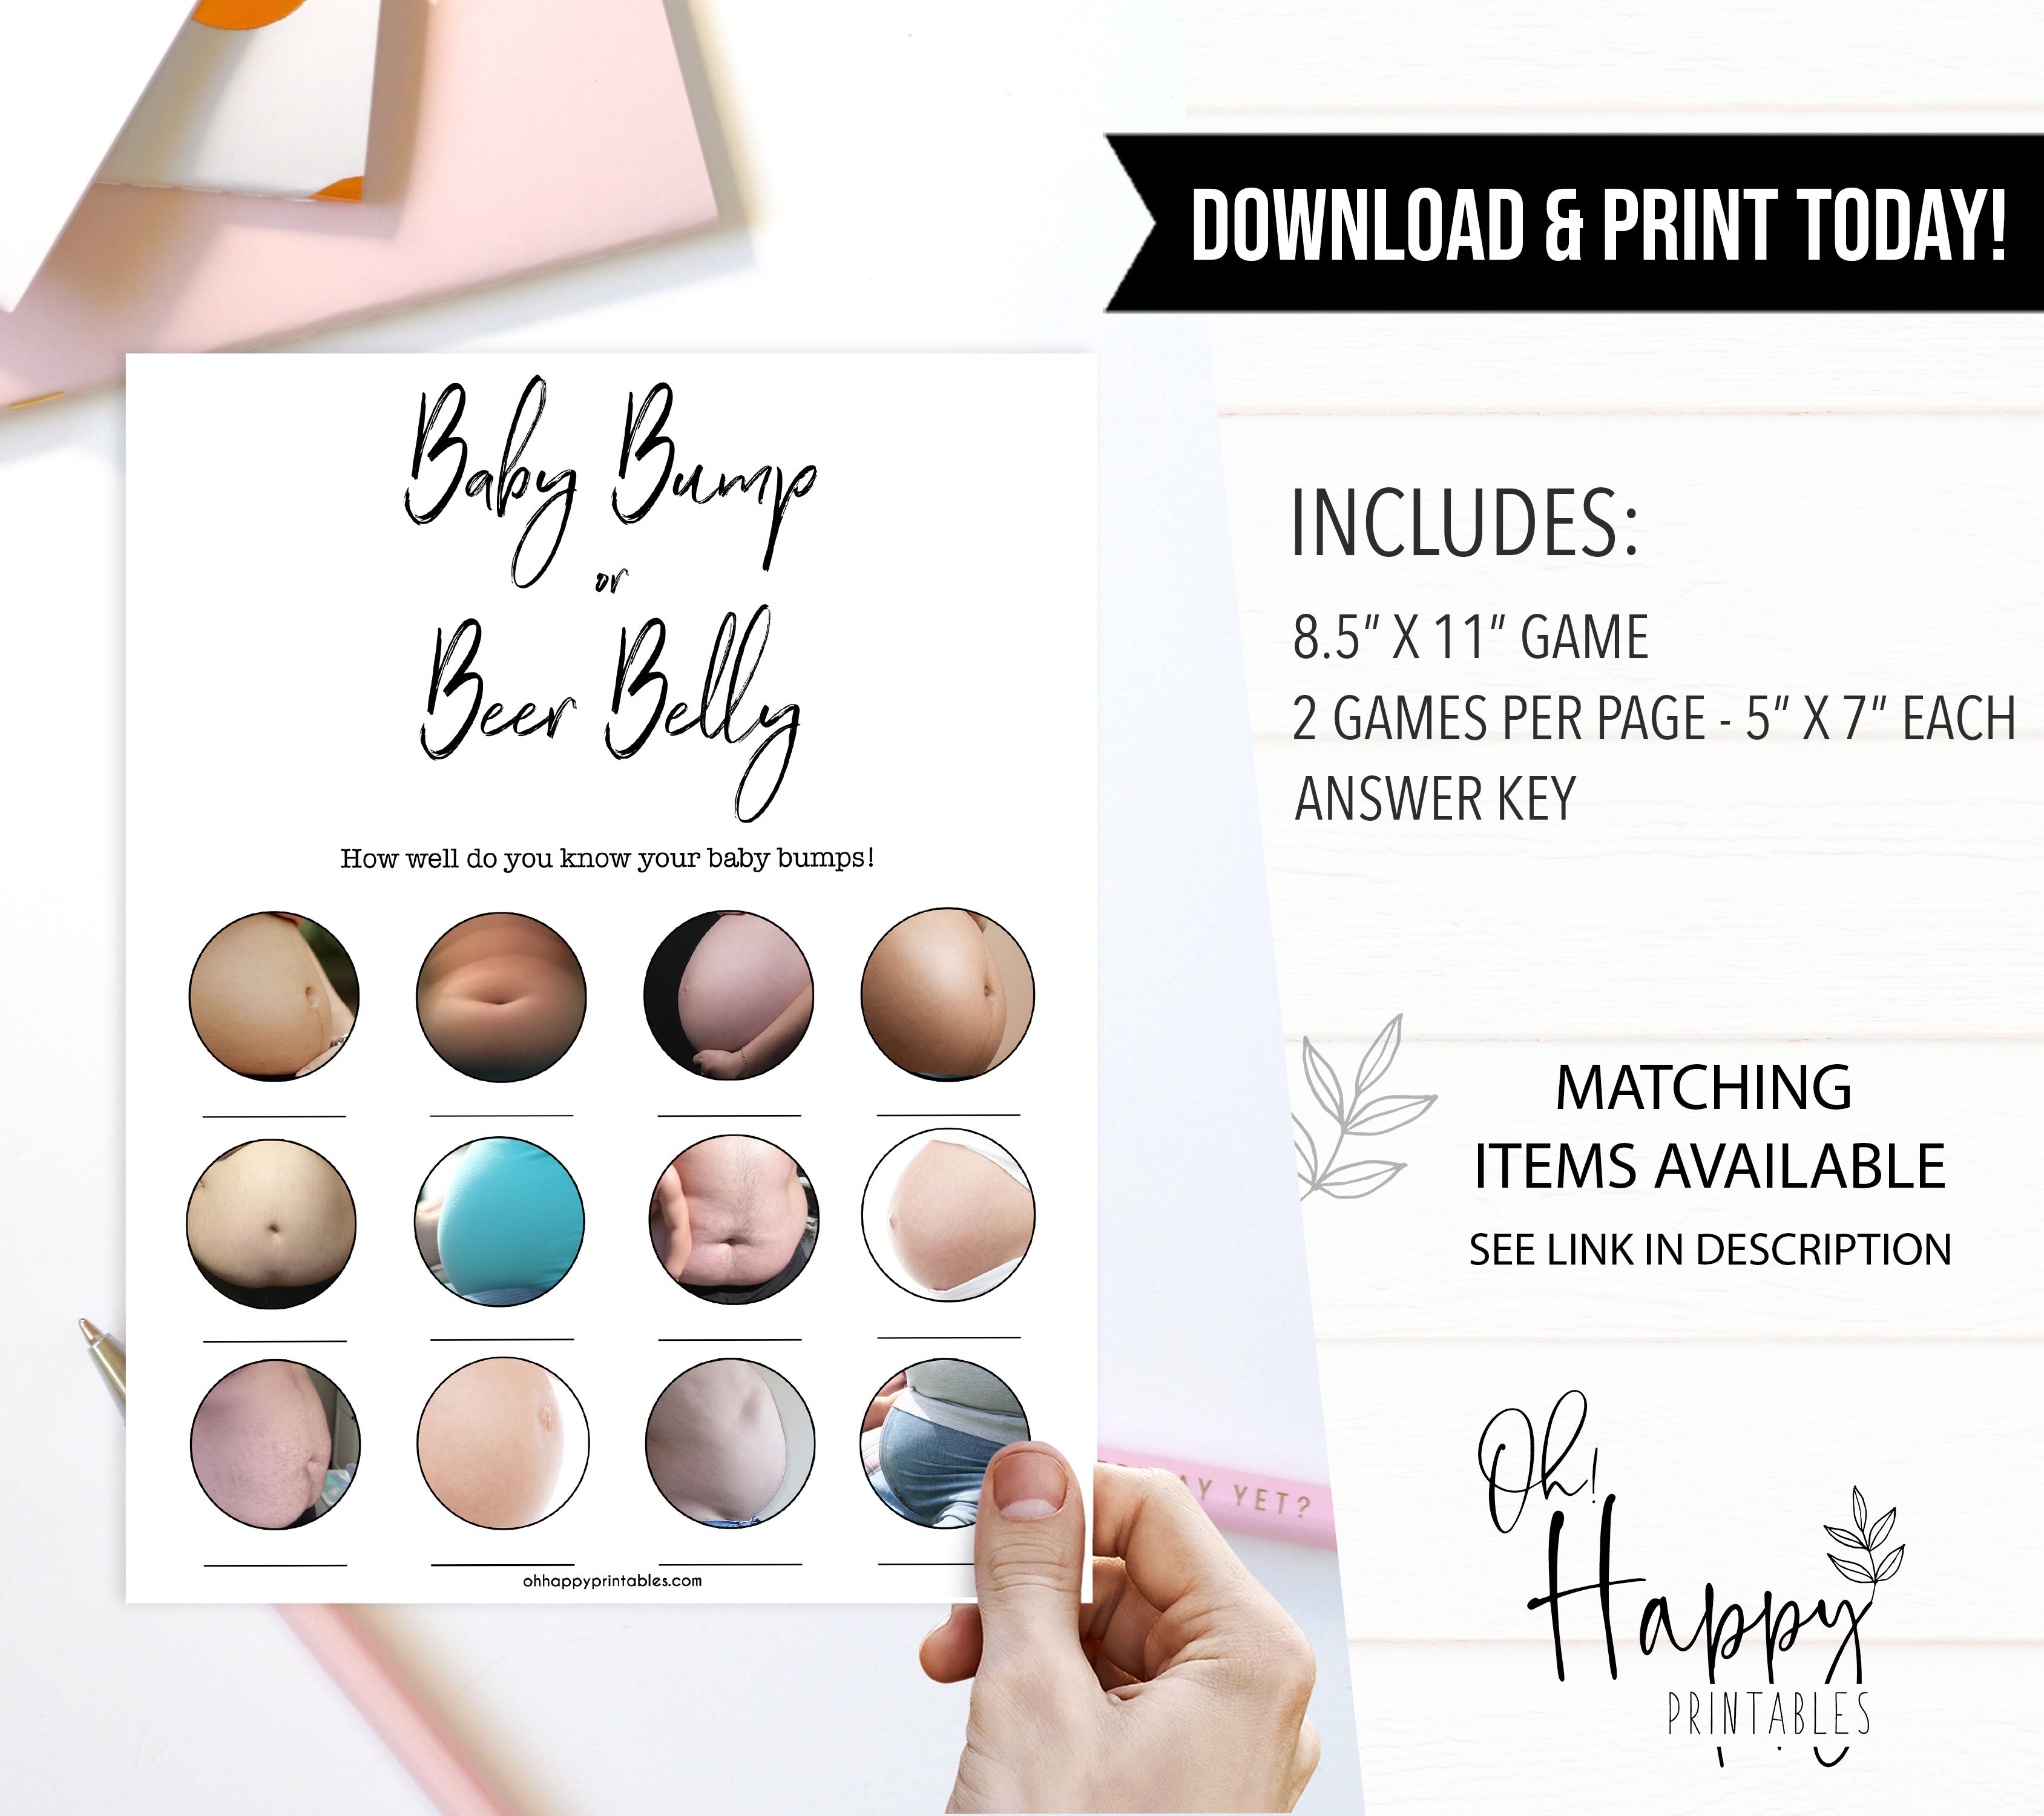 Minimalist baby shower games, baby bump or beer belly baby games, 10 baby game bundles, fun baby games, printable baby games, top baby games, popular baby games, labor or porn games, neutral baby games, gender reveal games